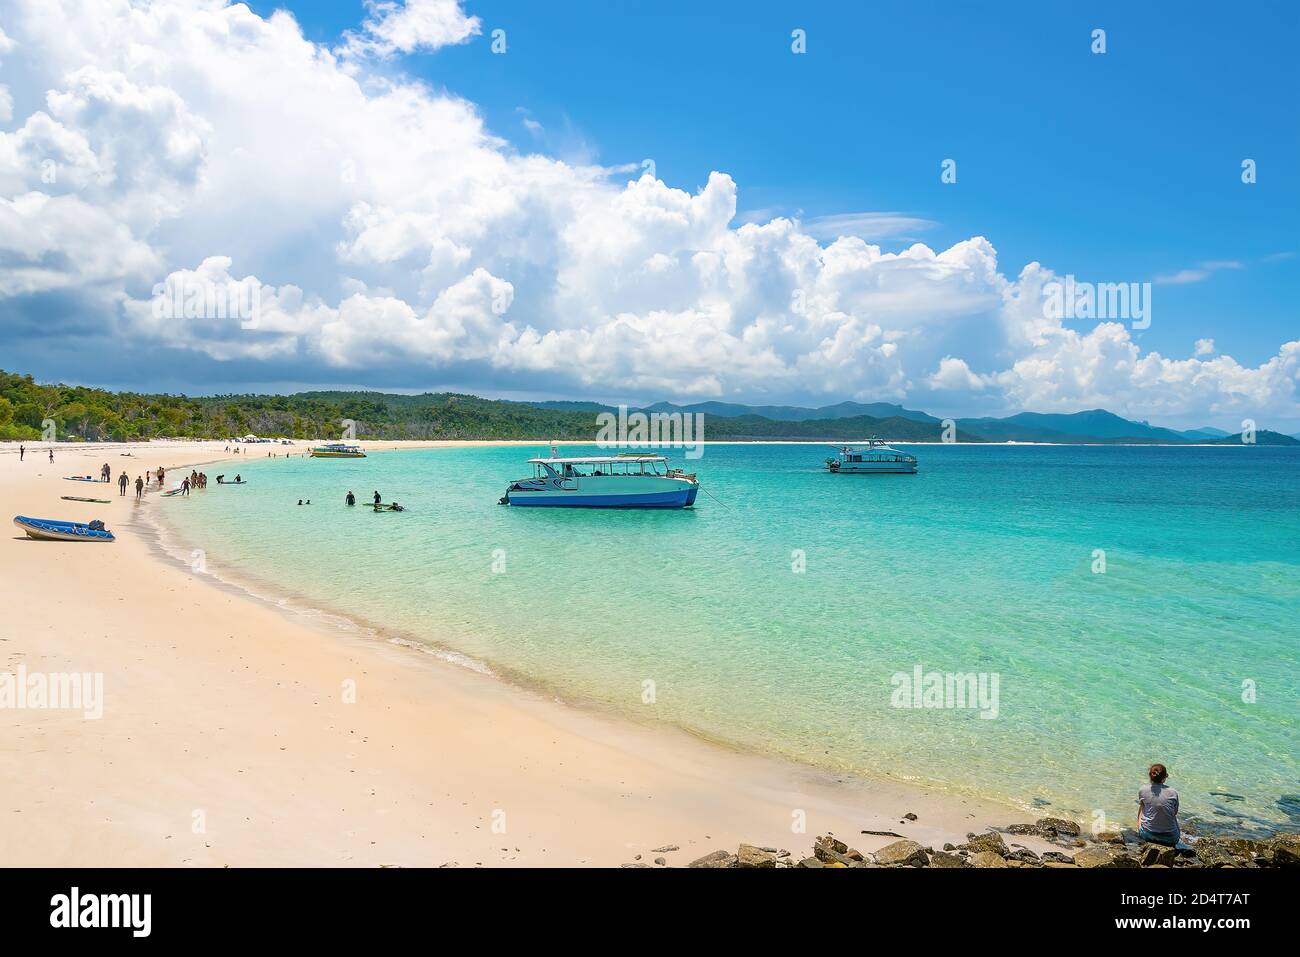 Whitsundays, Queensland, Australia - A group of people on the beach admiring the view and taking pictures at the Whitsunday Island. Stock Photo